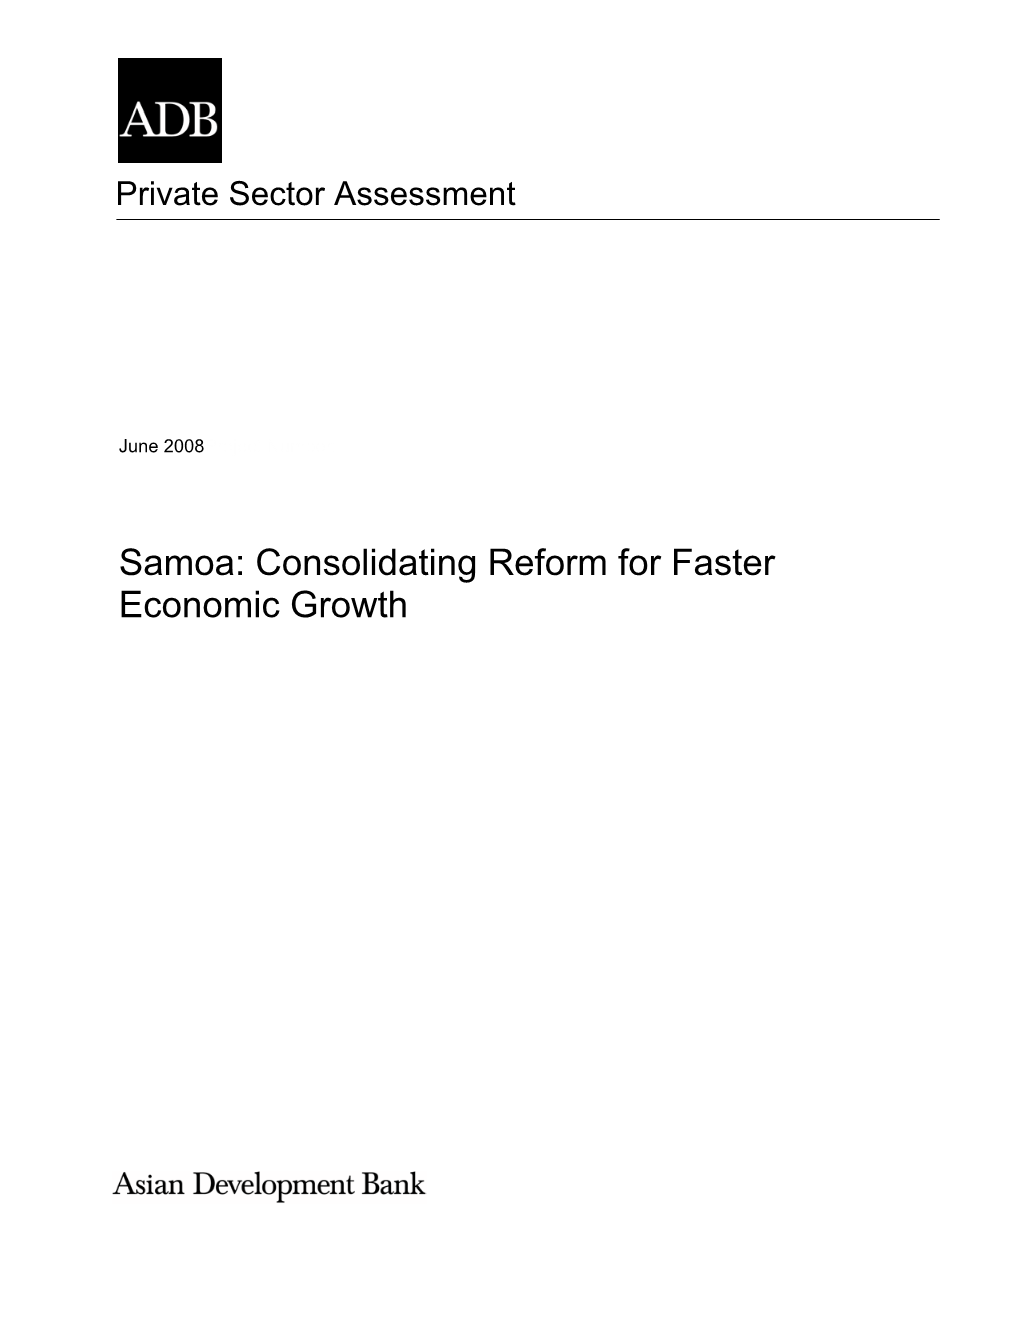 Consolidating Reform for Faster Economic Growth